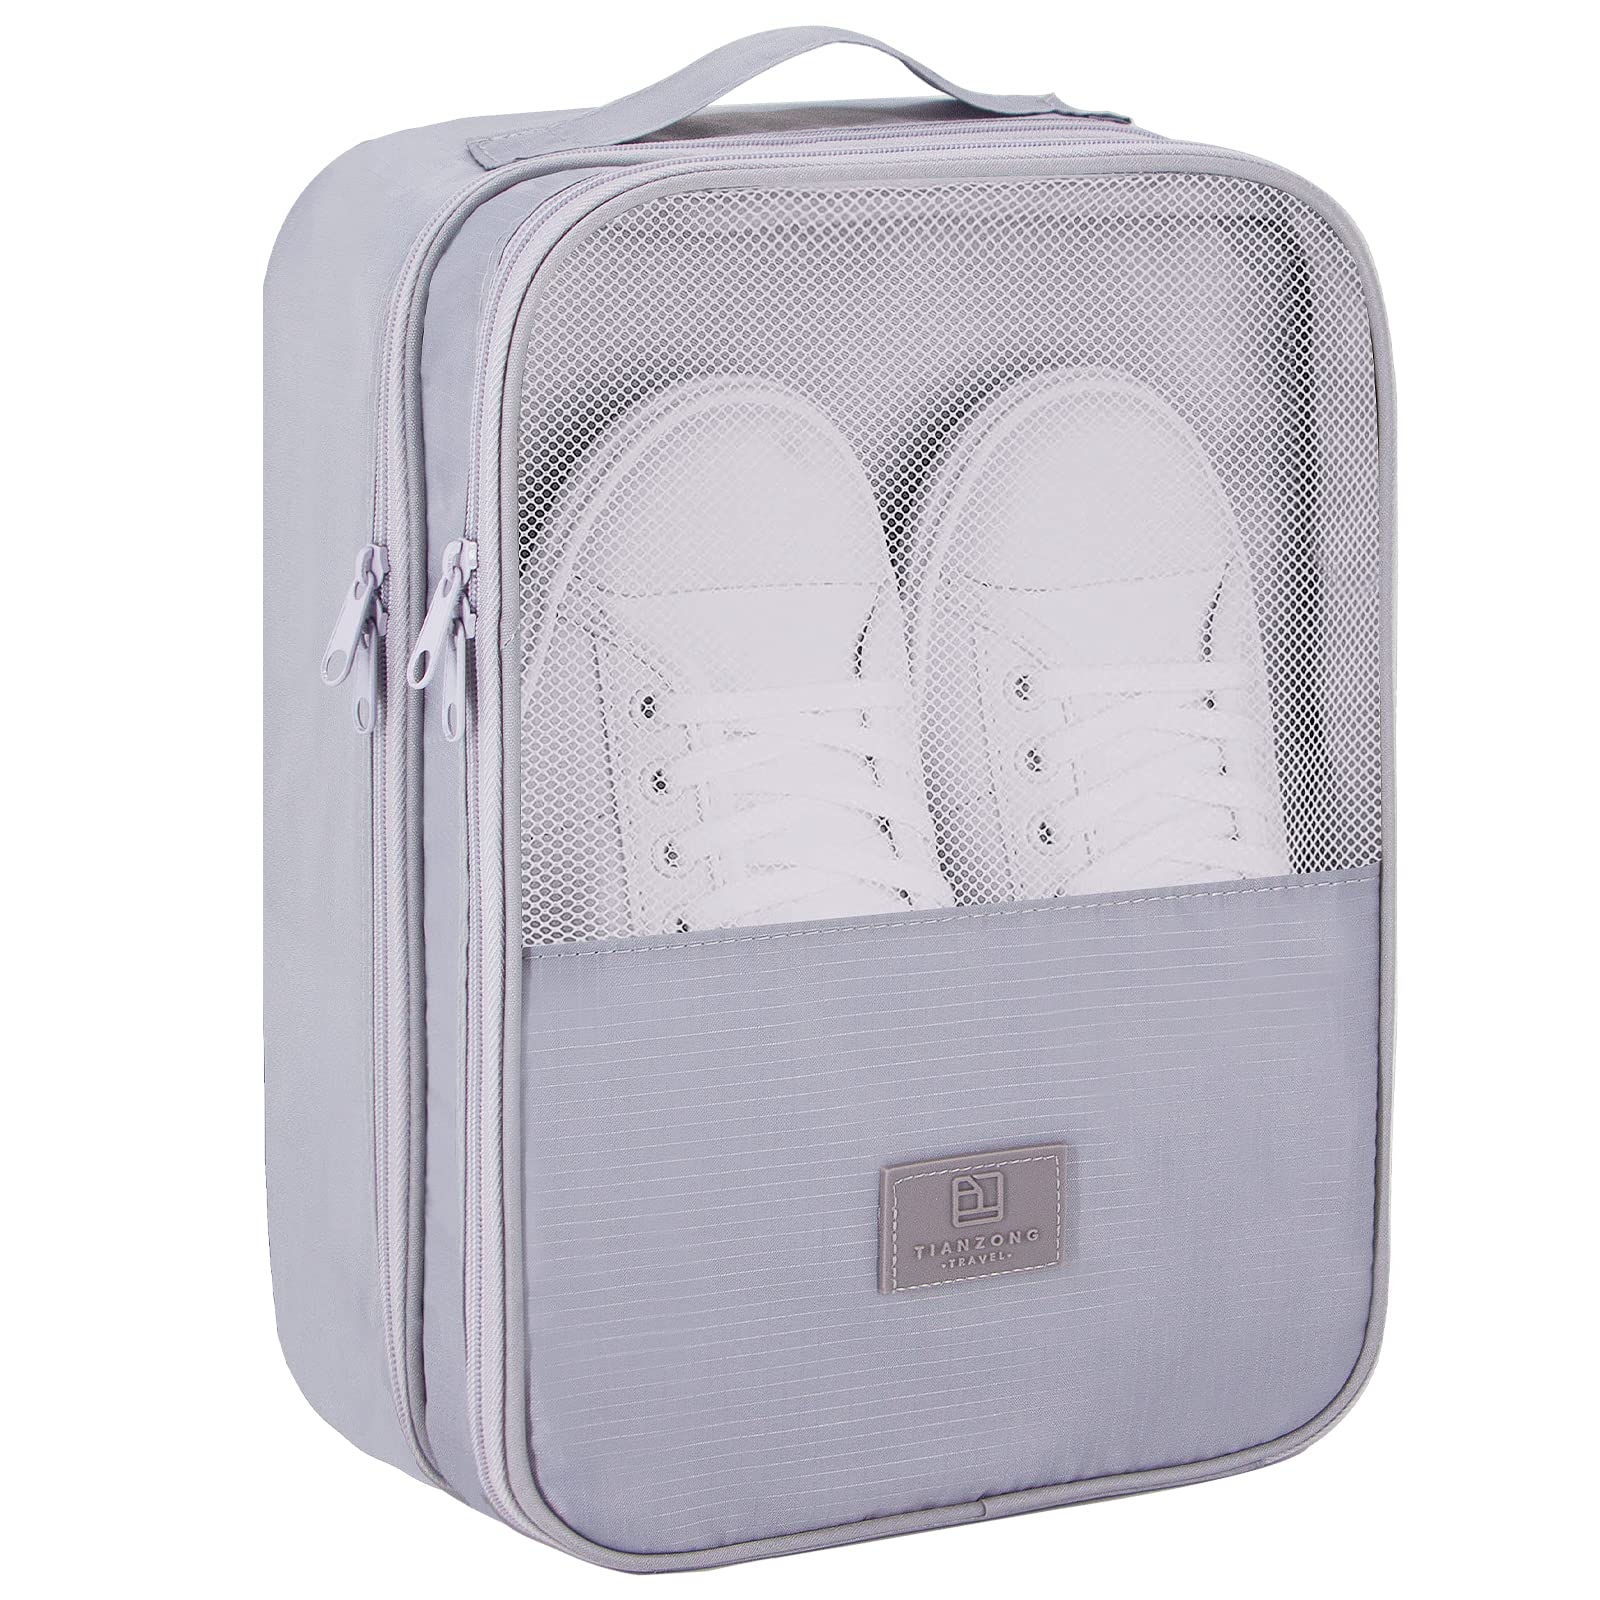 Shoe Bag for Travel Holds 3 Pair of Shoes with Zipper HLC064